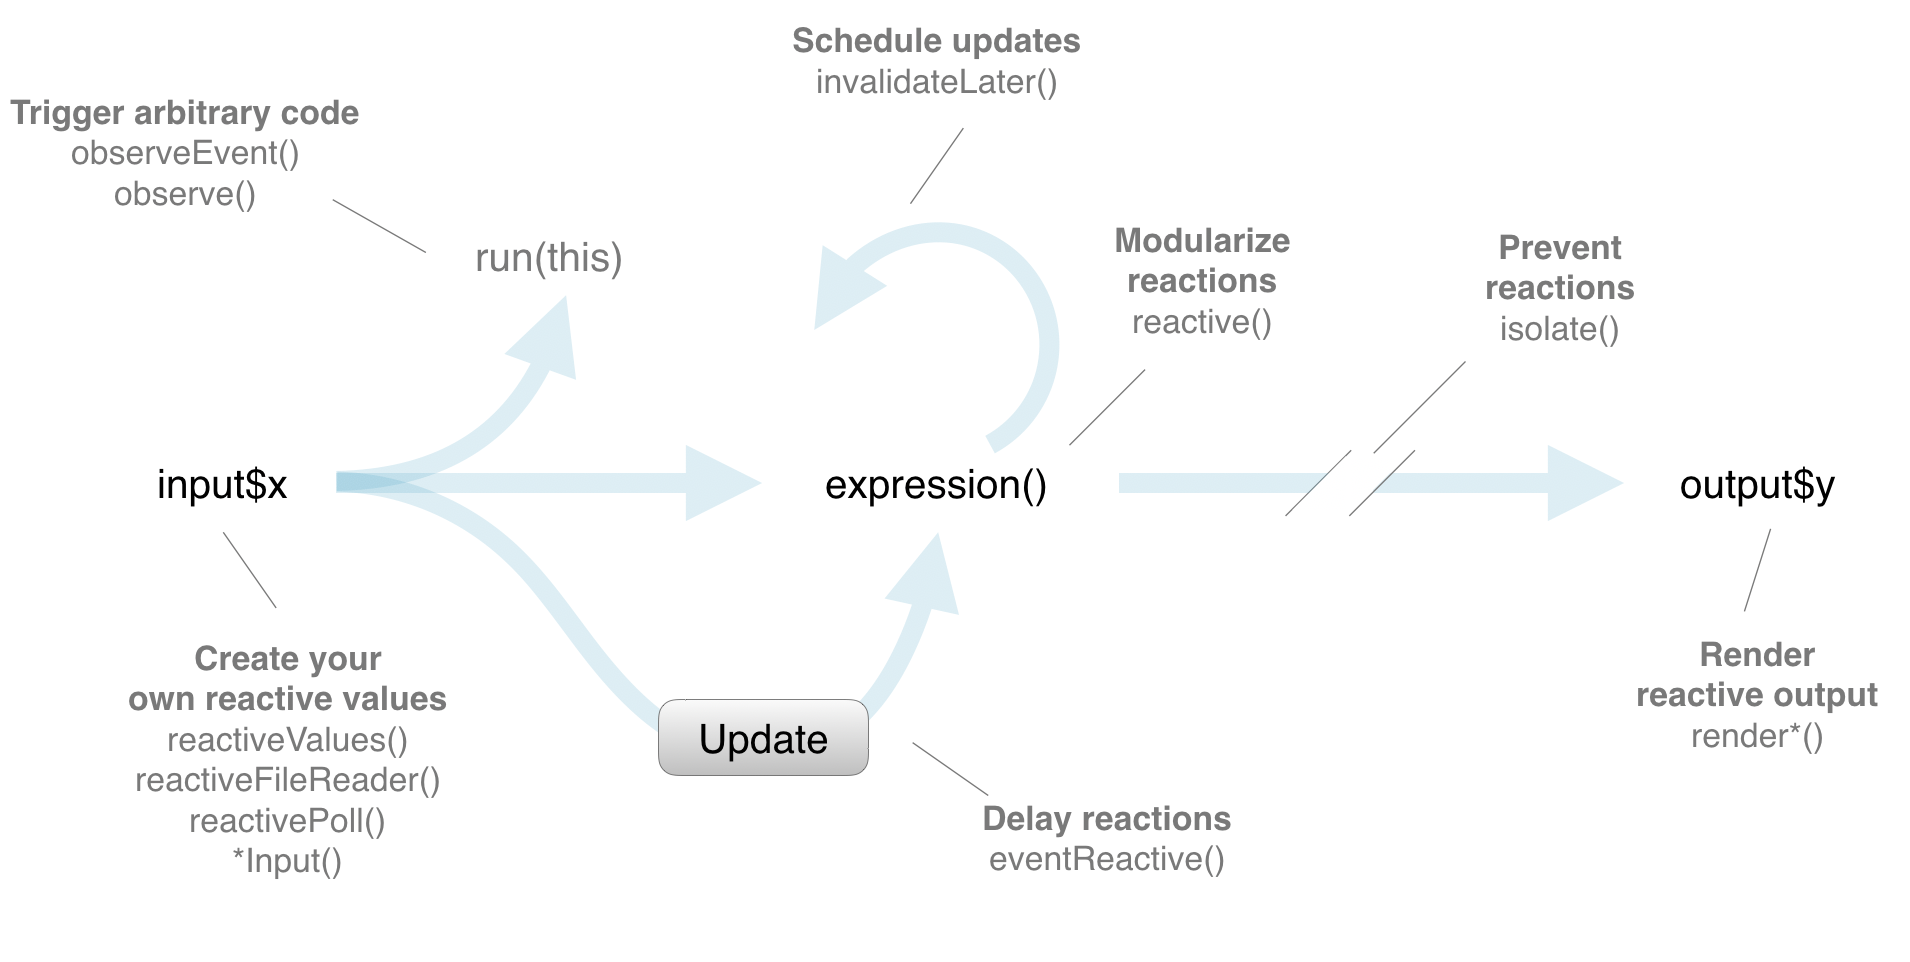 Diagram of the flow in a Shiny app. Starts at 'input$x' where you create your own reactive values. This goes to 'run(this)' to triggger arbitrary code, 'expression()', and an 'Update' button. The 'Update' button has an arrow to 'expression()' with 'Delay reactions - eventReactive()'. 'expression()' has a loop back to itself with 'Schedule updates - invalidateLateR()' and an arrow to 'output$y' through 'Modularize reactions - reactive()' and 'Prevent reactions - isolate()'. 'output$y' renders reactive output.